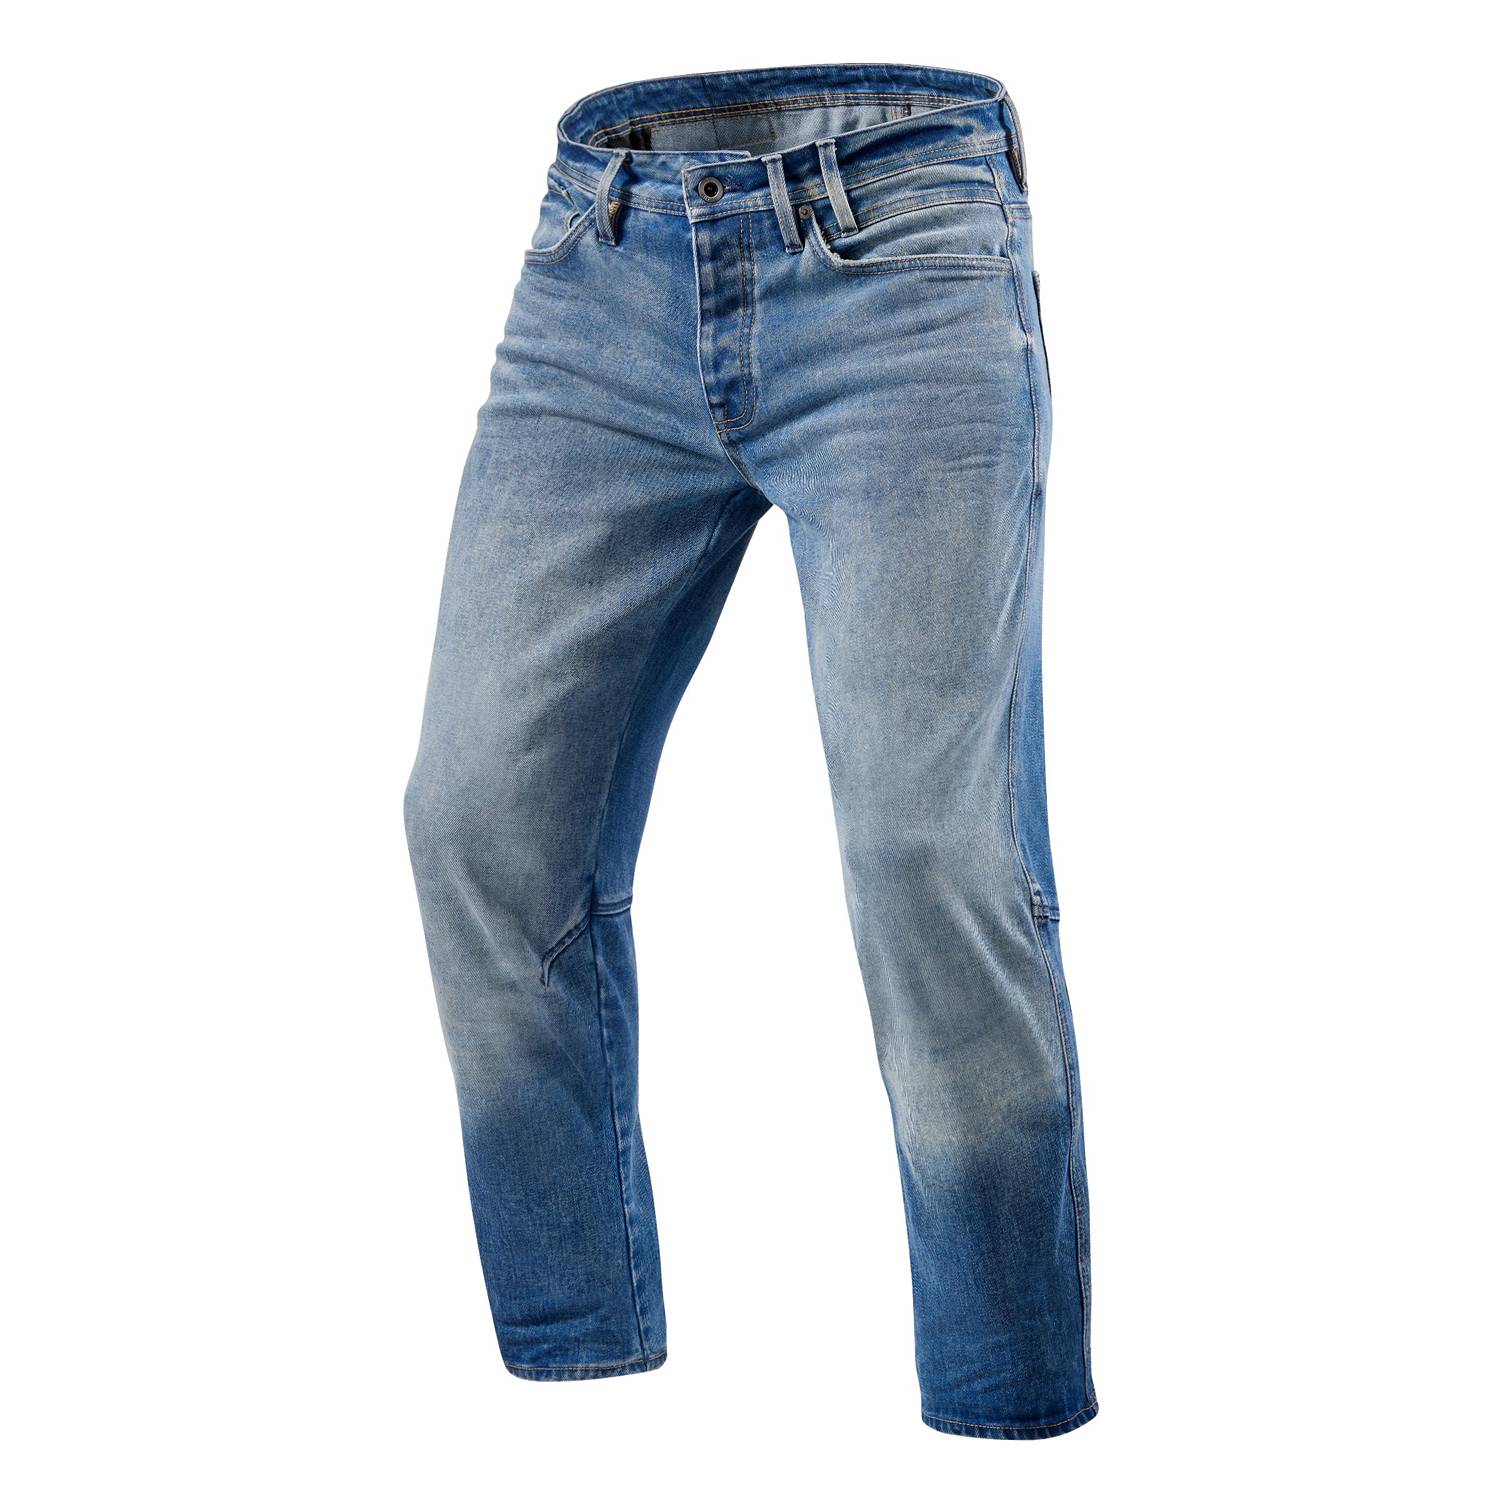 Image of REV'IT! Salt TF Mid Blue Used Motorcycle Jeans Size L36/W31 ID 8700001339230